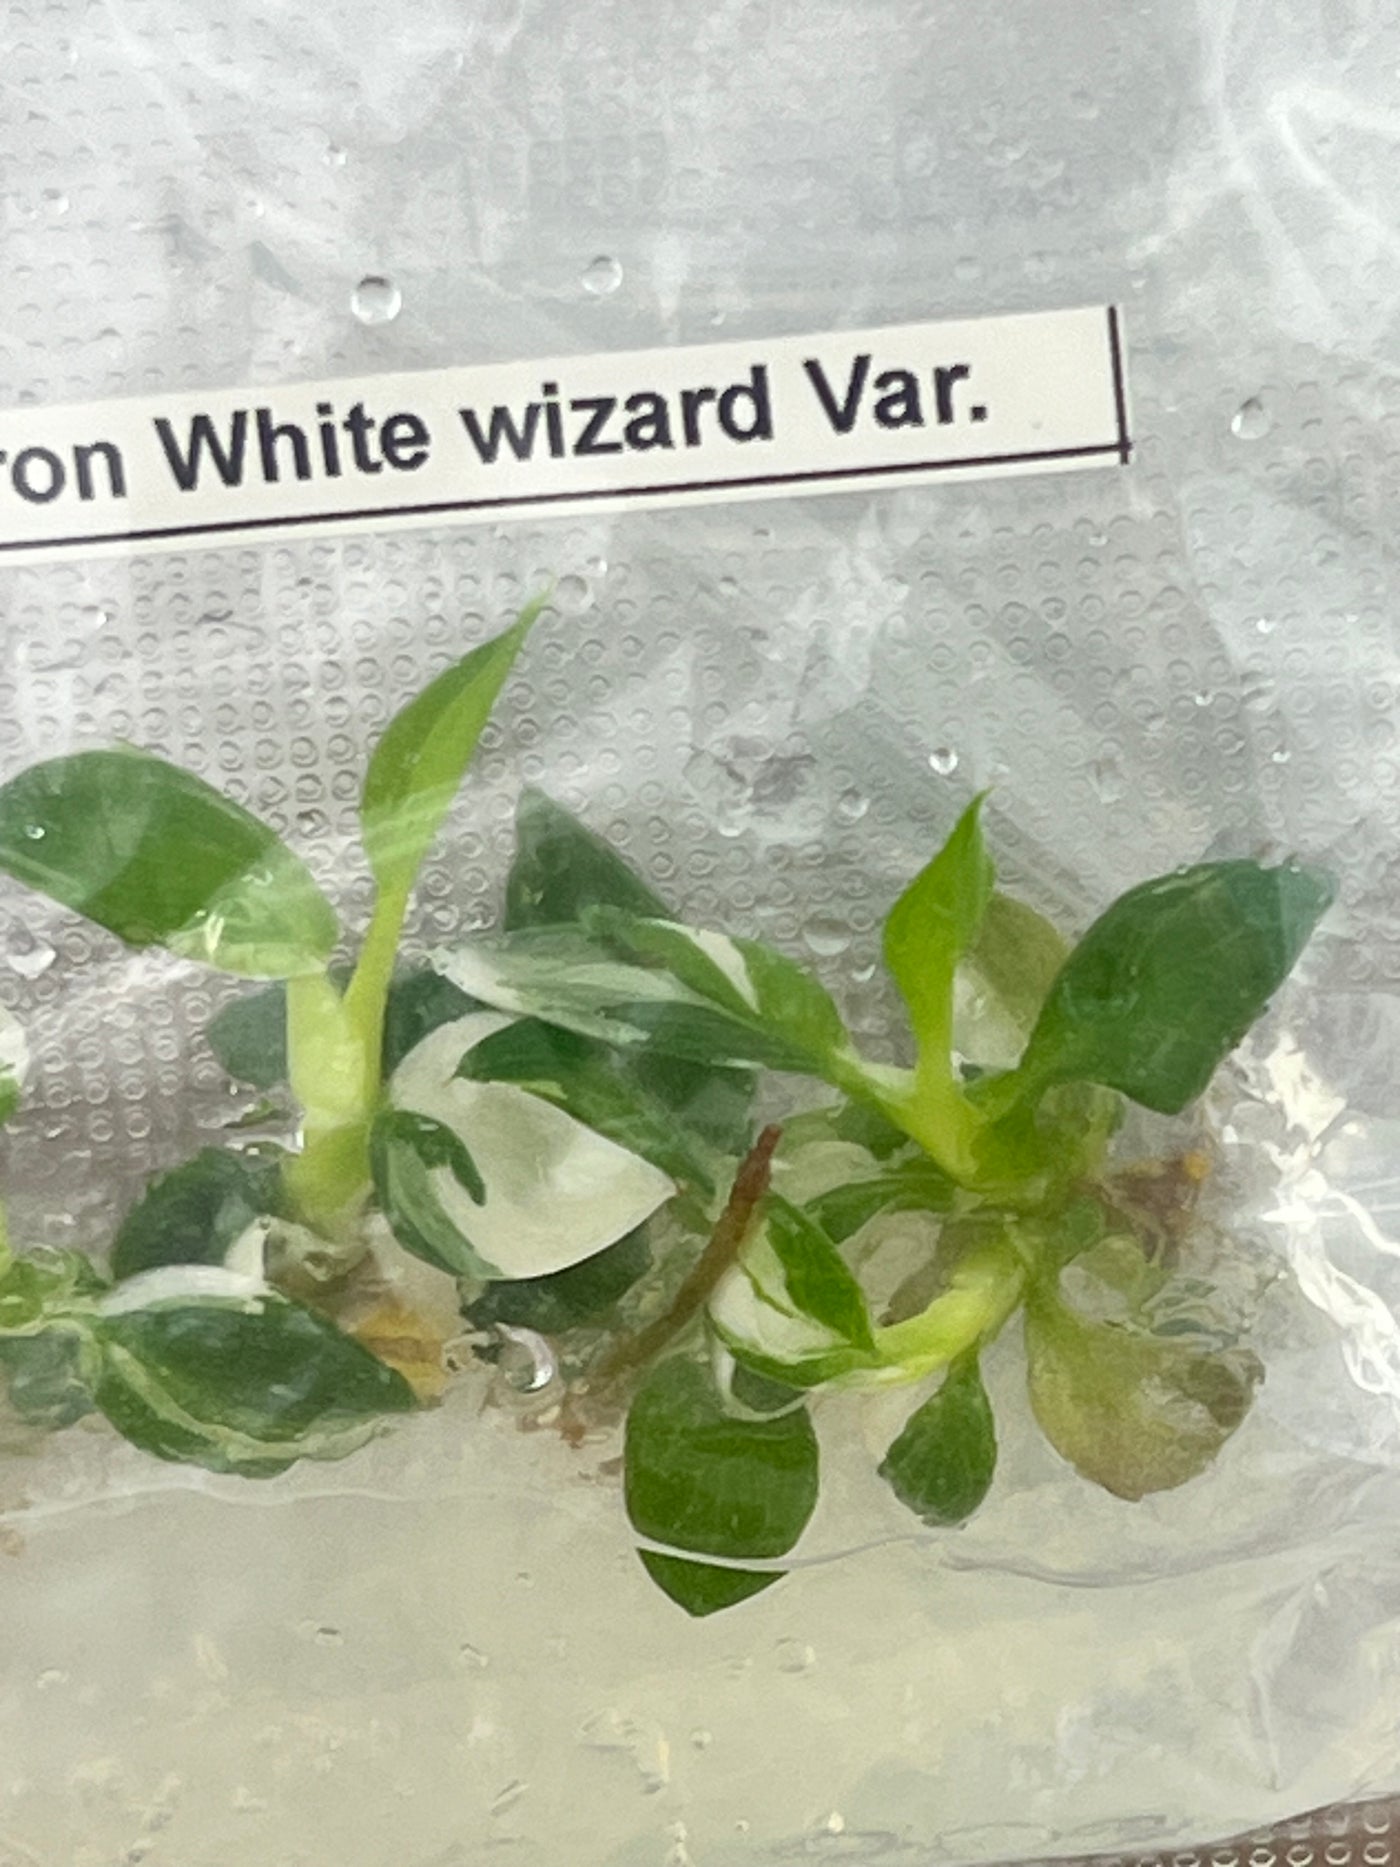 Philodendron White Wizard Plantlets (5)